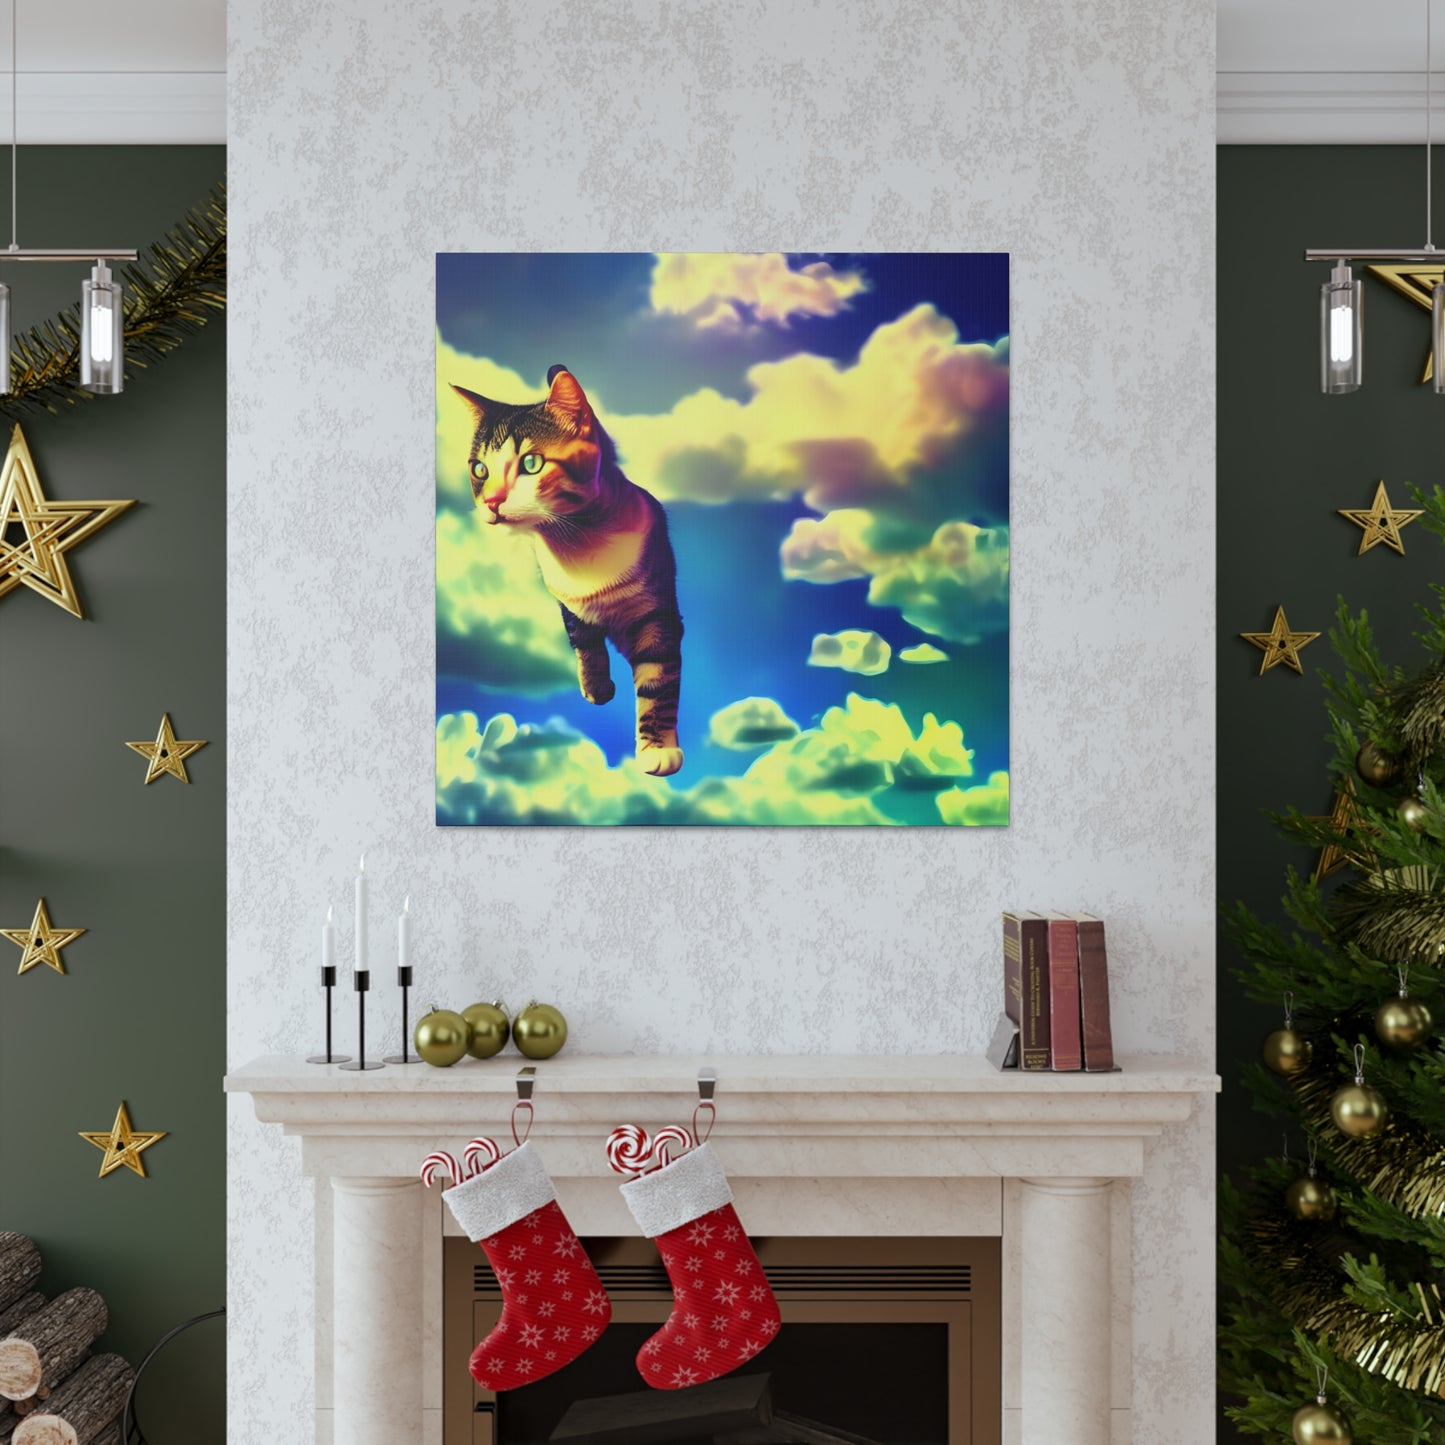 Cat In The Clouds - Gallery Canvas